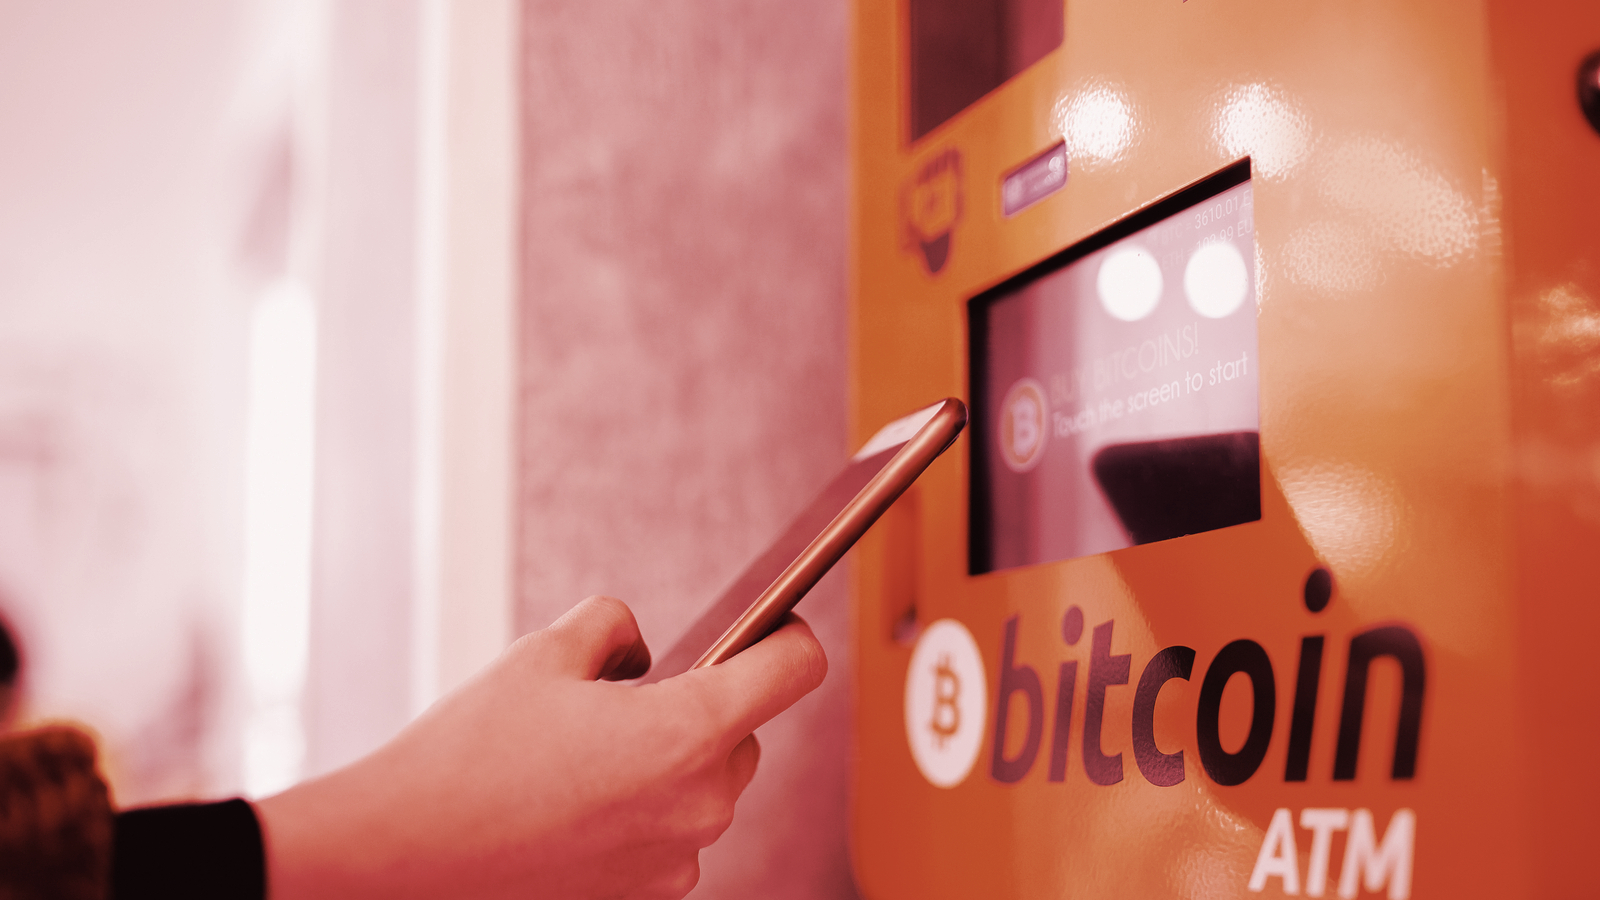 New York Man Charged With Running Unlicensed Bitcoin ATMs That Sold $5.6M in BTC